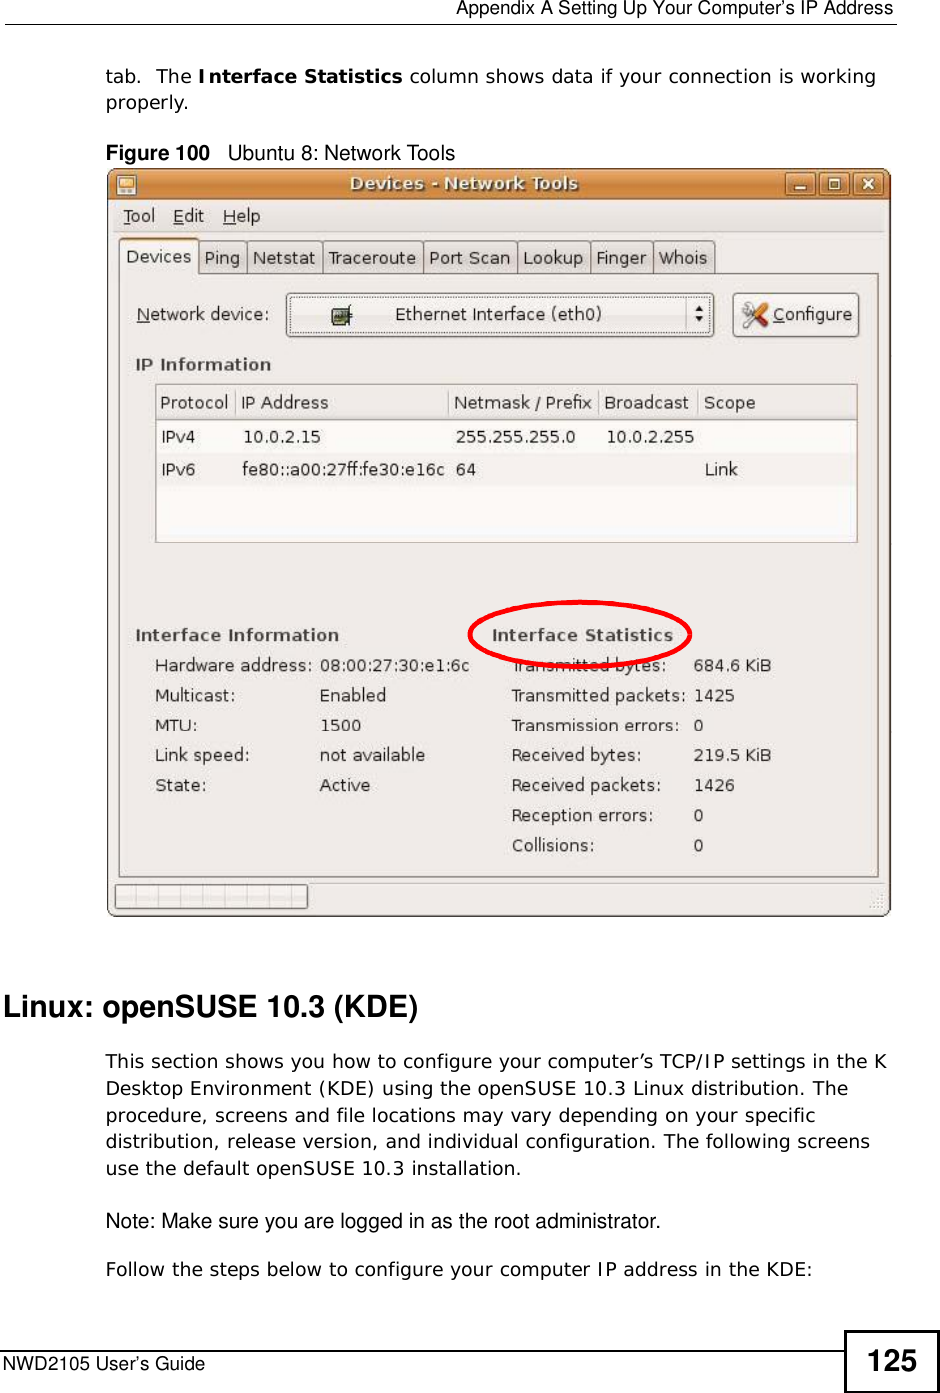  Appendix ASetting Up Your Computer’s IP AddressNWD2105 User’s Guide 125tab.  The Interface Statistics column shows data if your connection is working properly.Figure 100   Ubuntu 8: Network ToolsLinux: openSUSE 10.3 (KDE)This section shows you how to configure your computer’s TCP/IP settings in the K Desktop Environment (KDE) using the openSUSE 10.3 Linux distribution. The procedure, screens and file locations may vary depending on your specific distribution, release version, and individual configuration. The following screens use the default openSUSE 10.3 installation.Note: Make sure you are logged in as the root administrator. Follow the steps below to configure your computer IP address in the KDE: